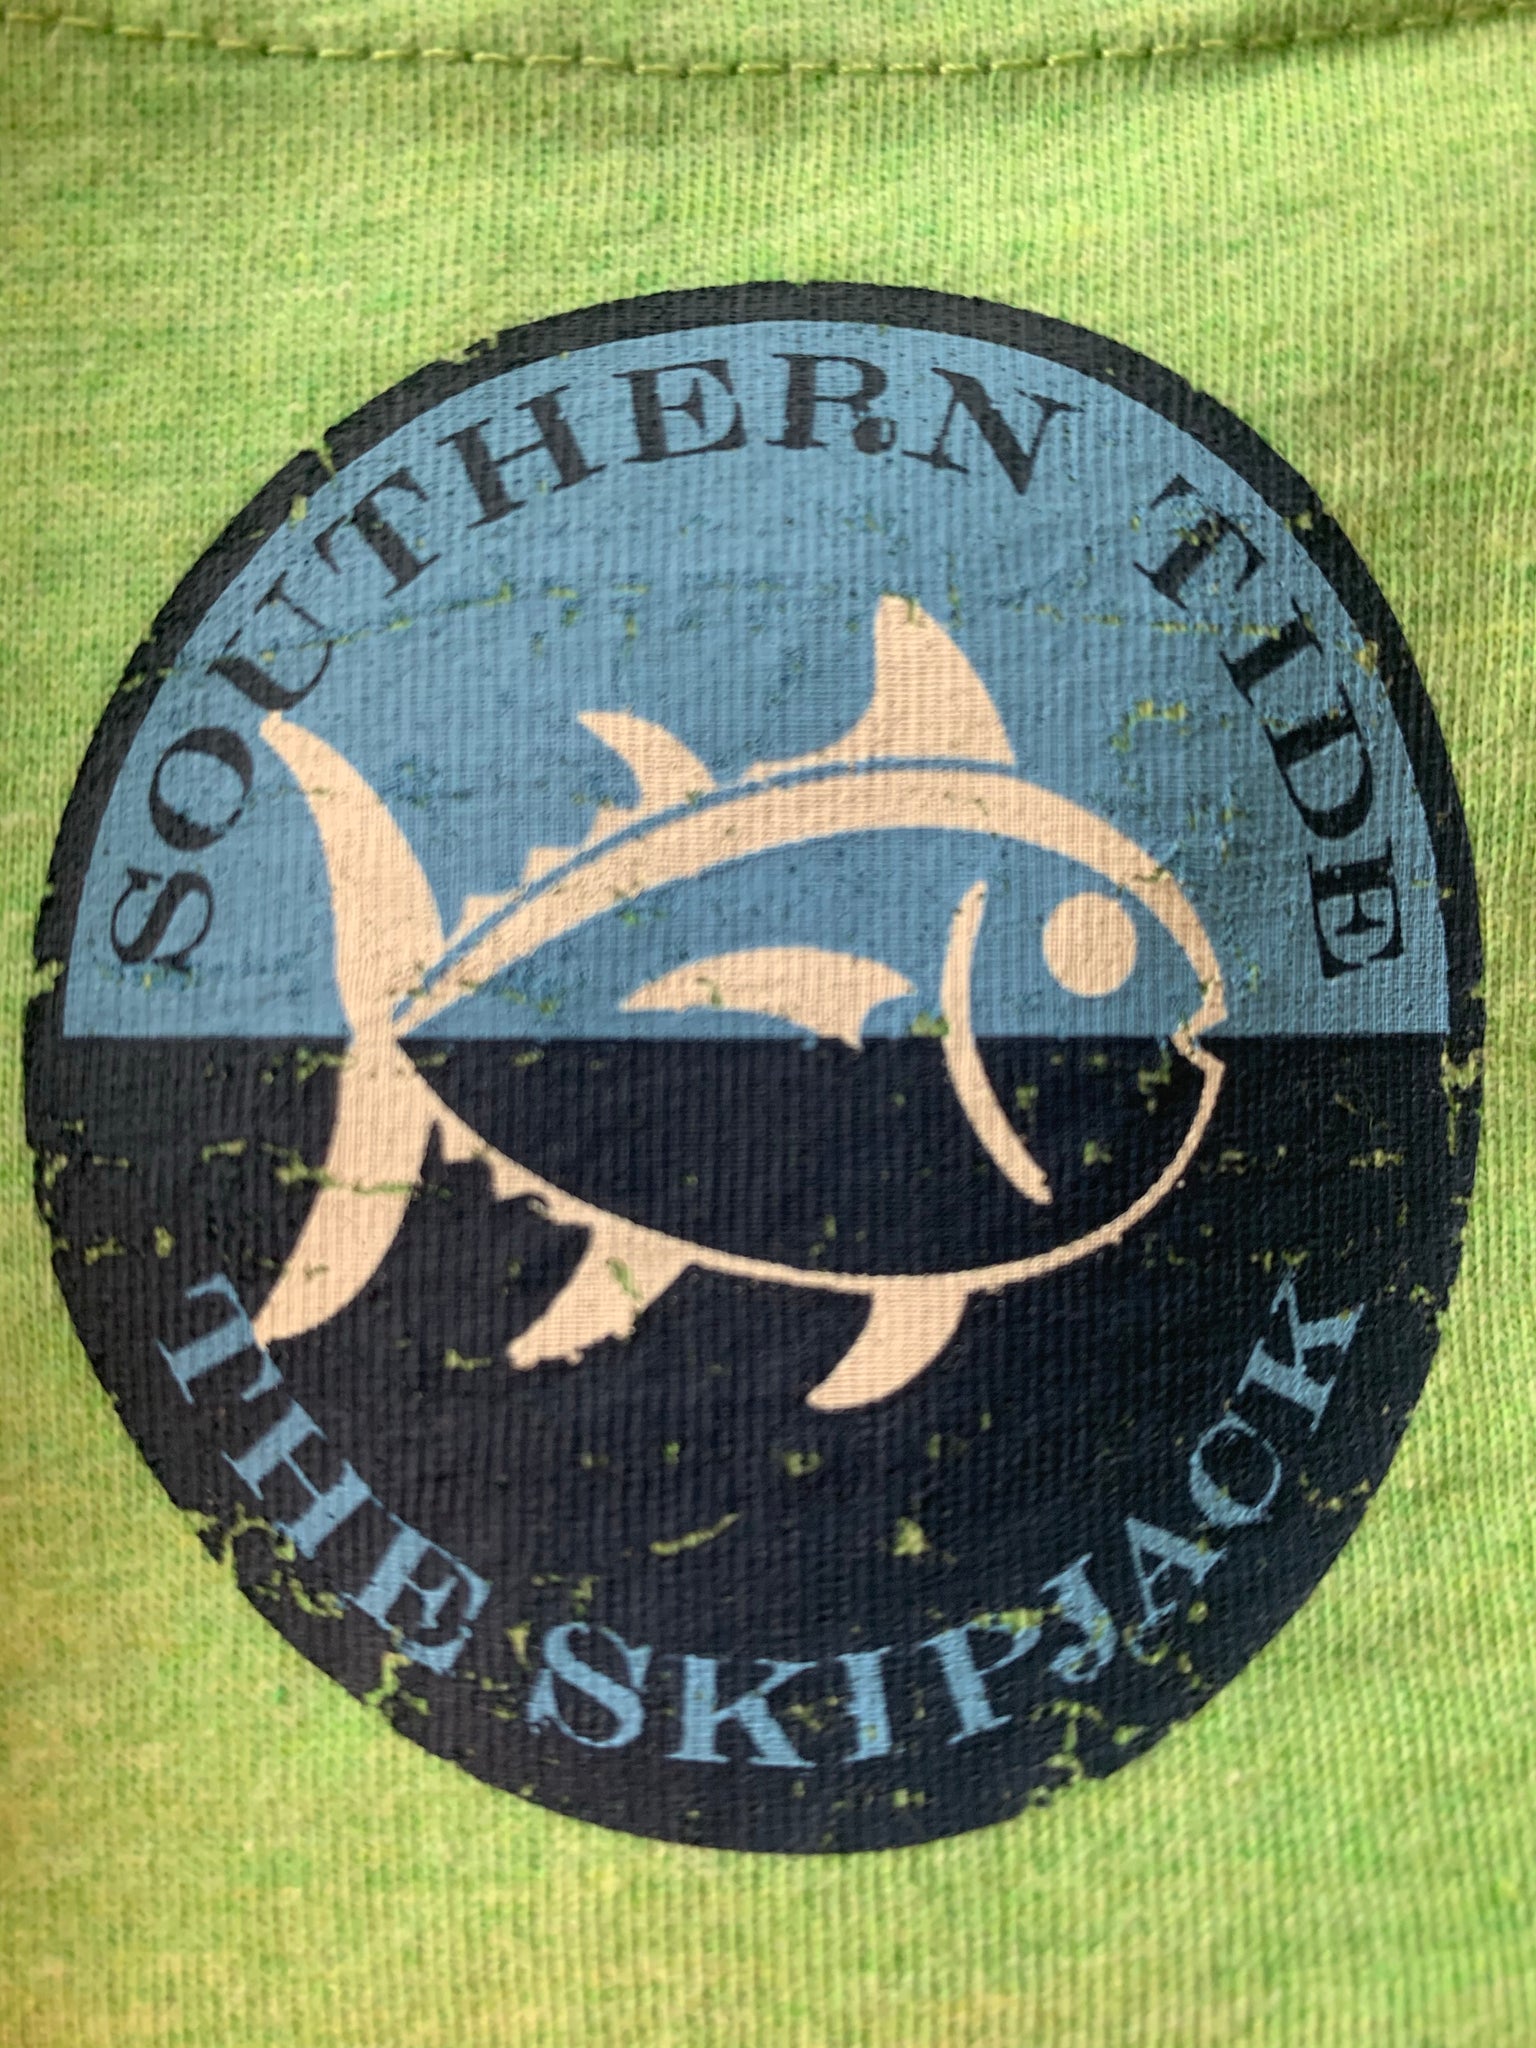 Southern Tide Short Sleeve Graphic T-Shirts